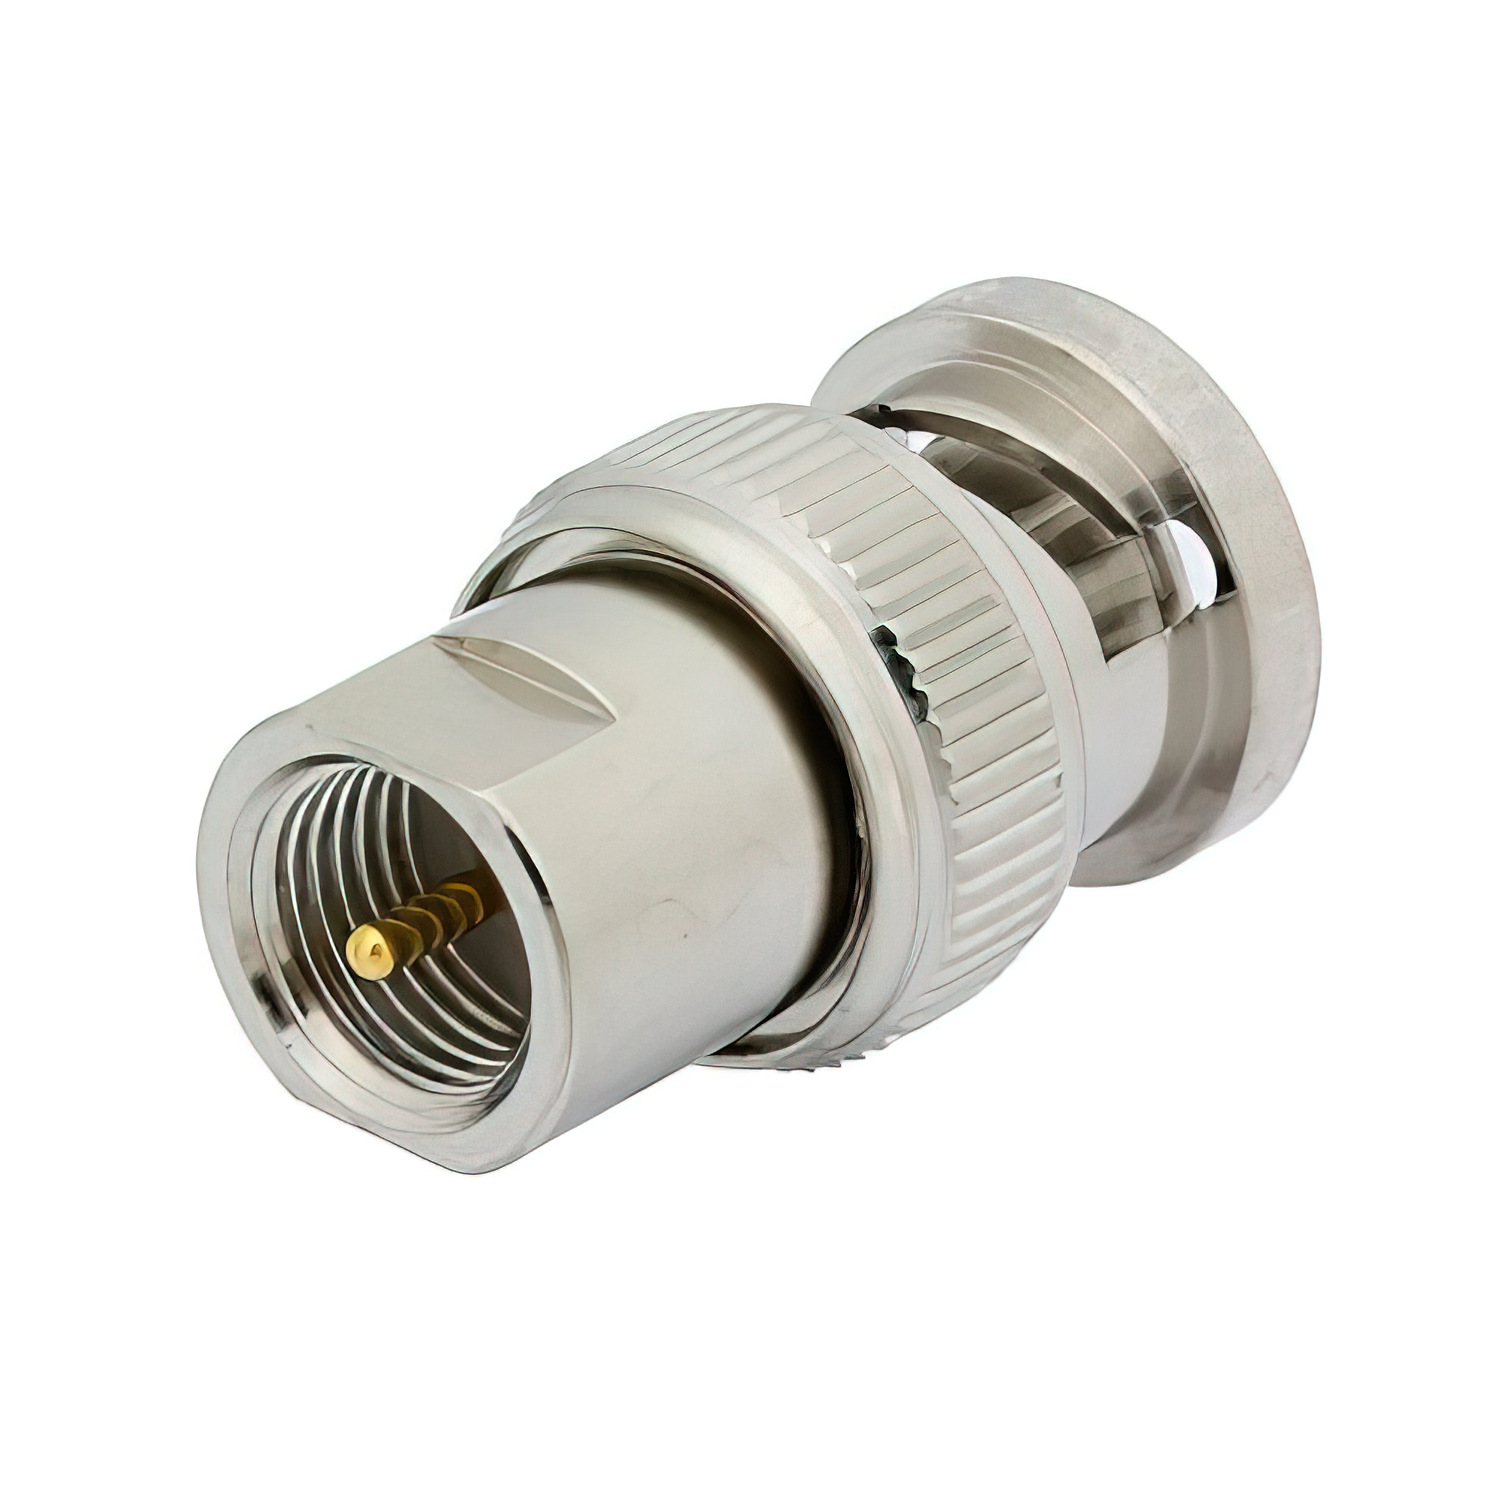 FME Plug to BNC Male Adapter1